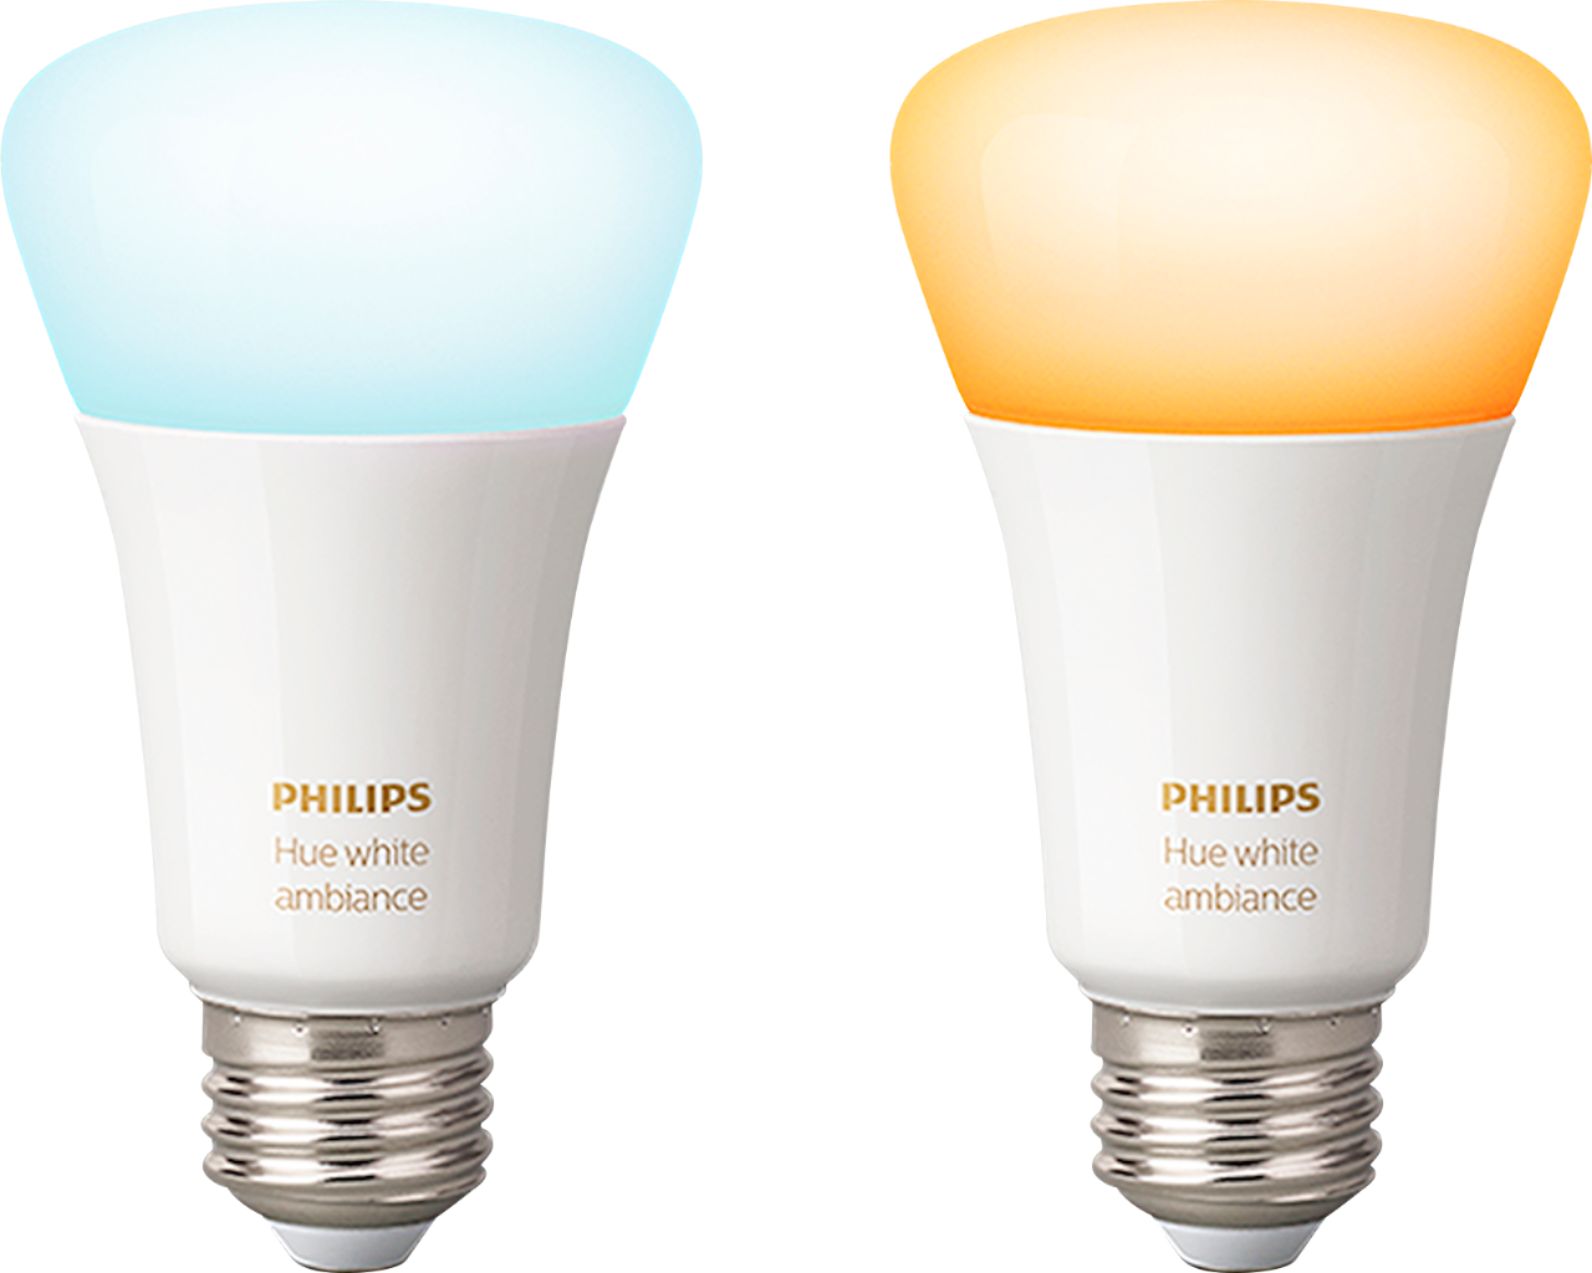 philips hue white and color ambiance - dual pack - e27 bulb - Best Buy